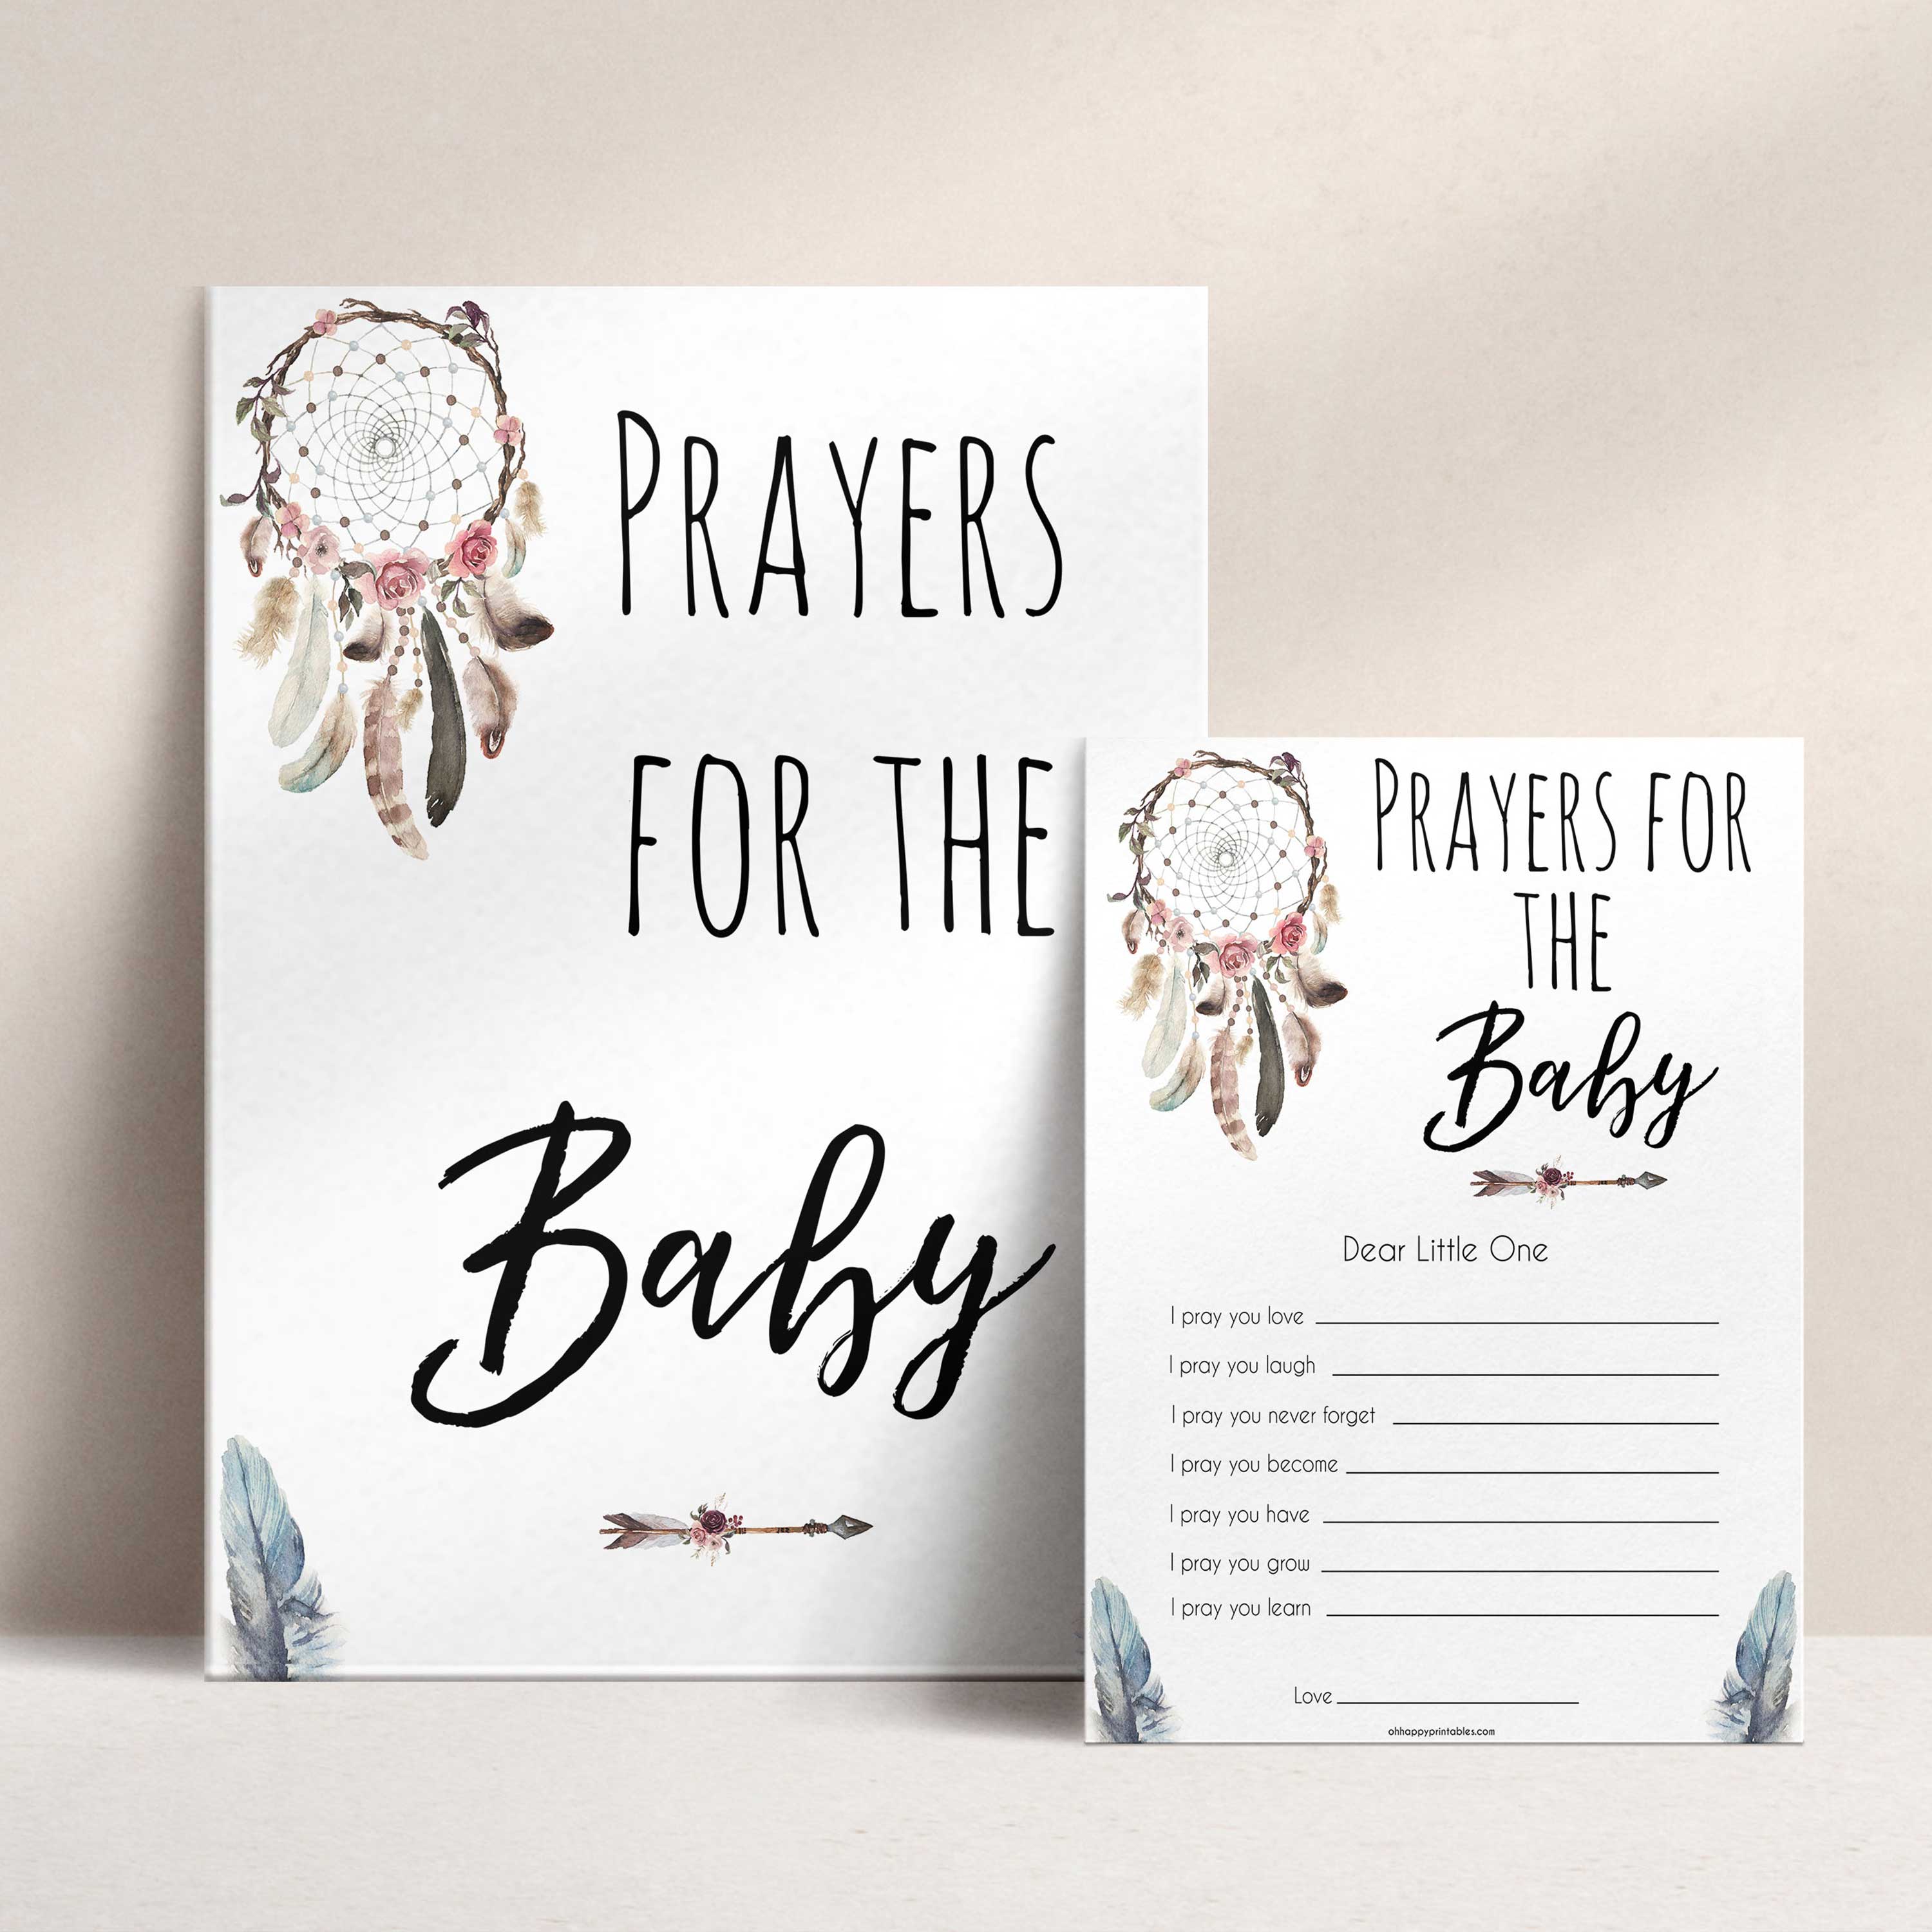 Boho baby games, prayers for the baby baby game, fun baby games, printable baby games, top 10 baby games, boho baby shower, baby games, hilarious baby games